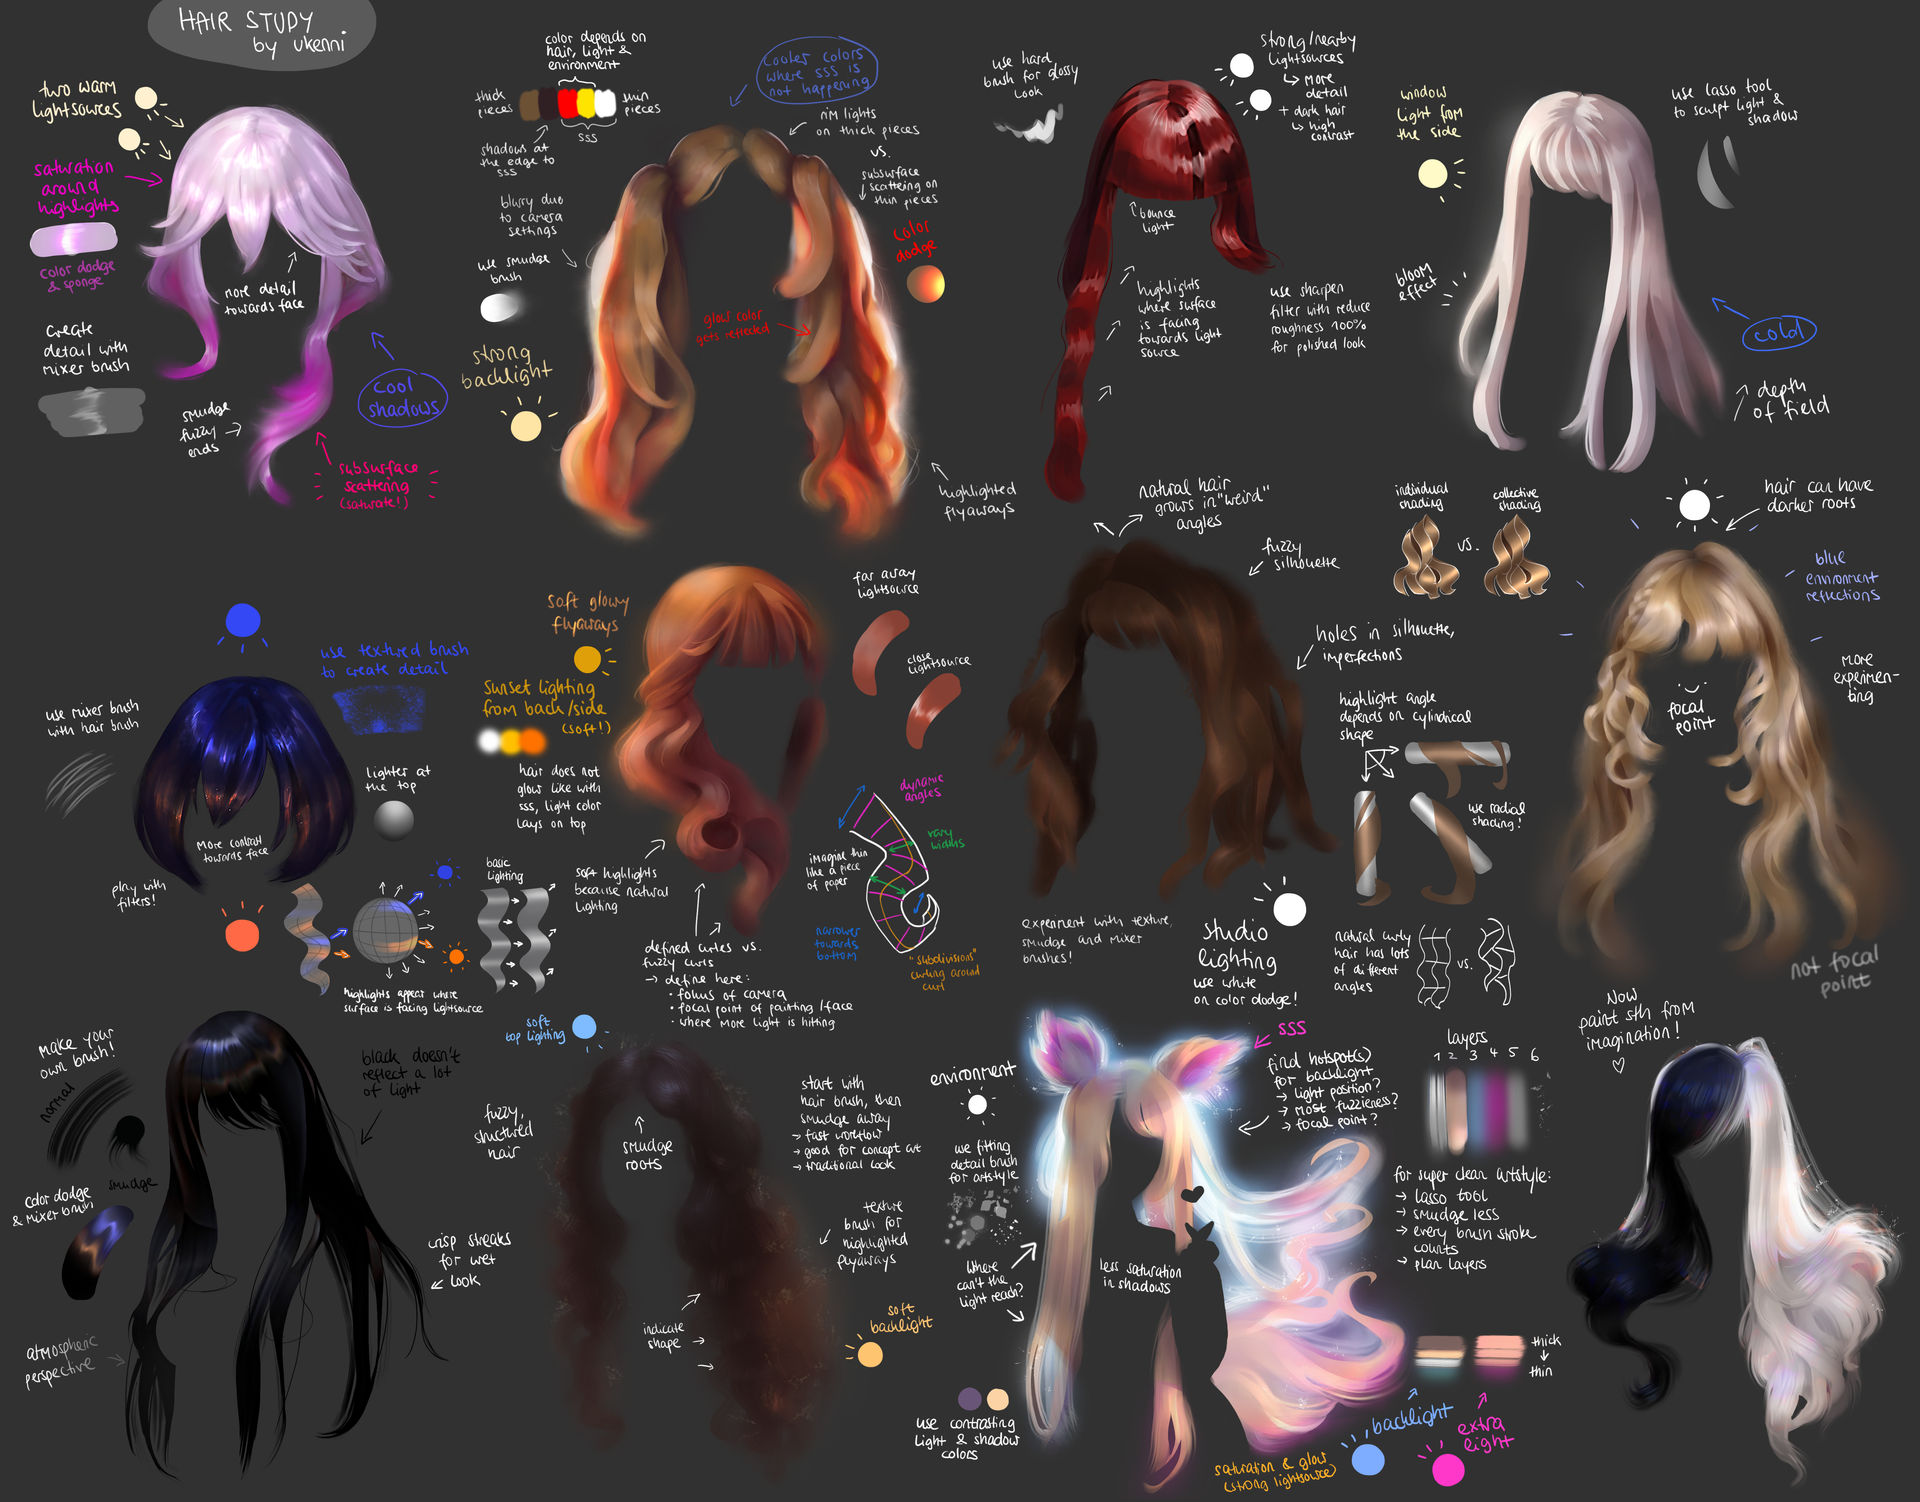 Hair Reference 1 by Disaya on DeviantArt